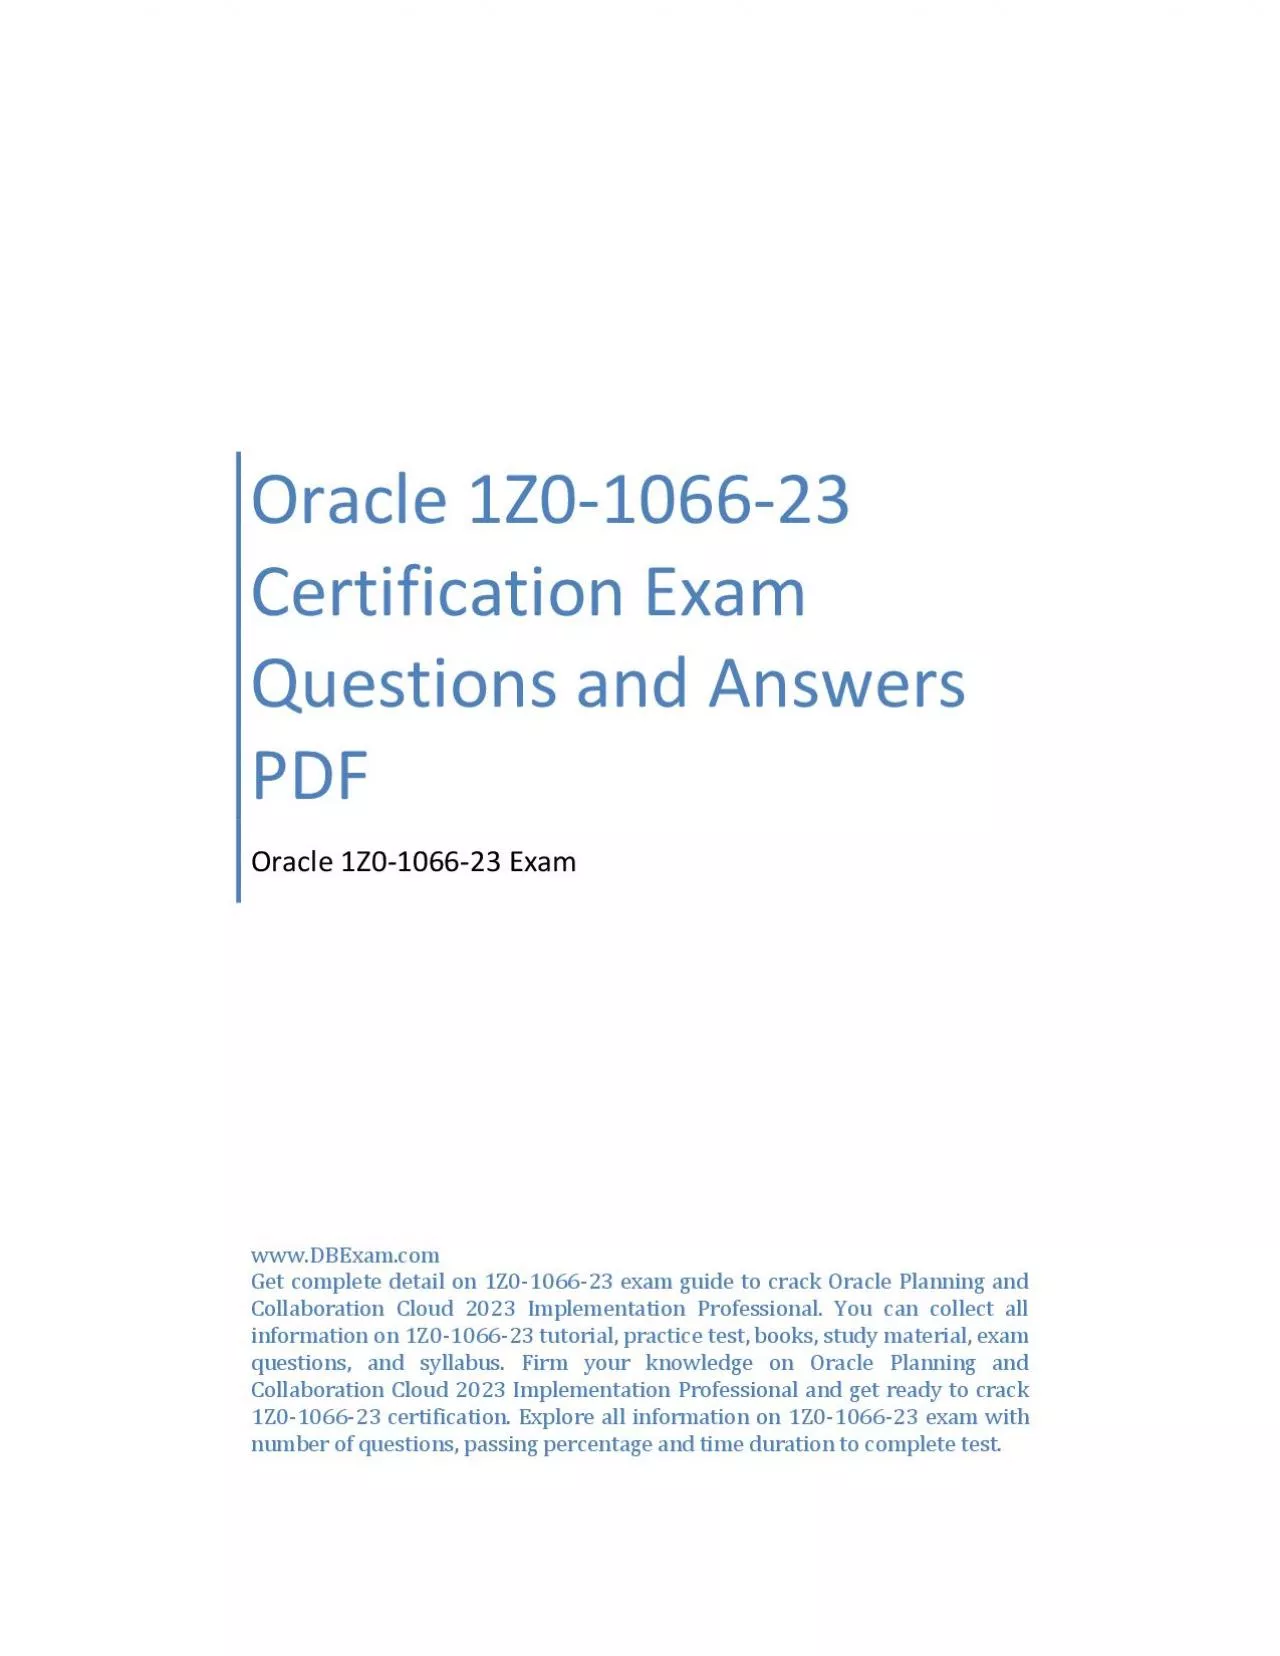 Oracle 1Z0-1066-23 Certification Exam Questions and Answers PDF